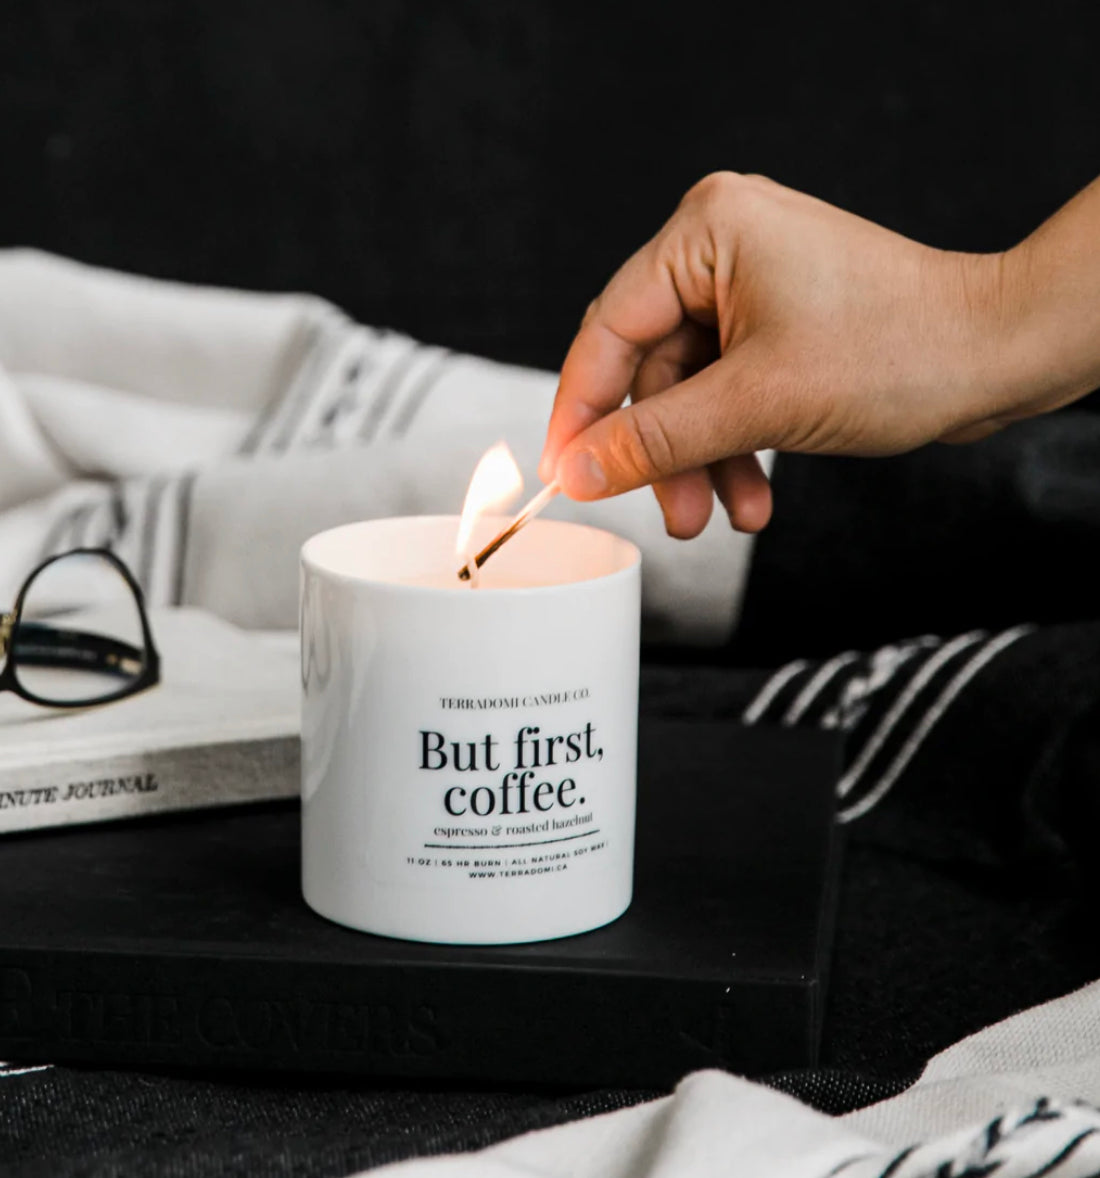 “But first coffee” candle by Terradomi candle co.